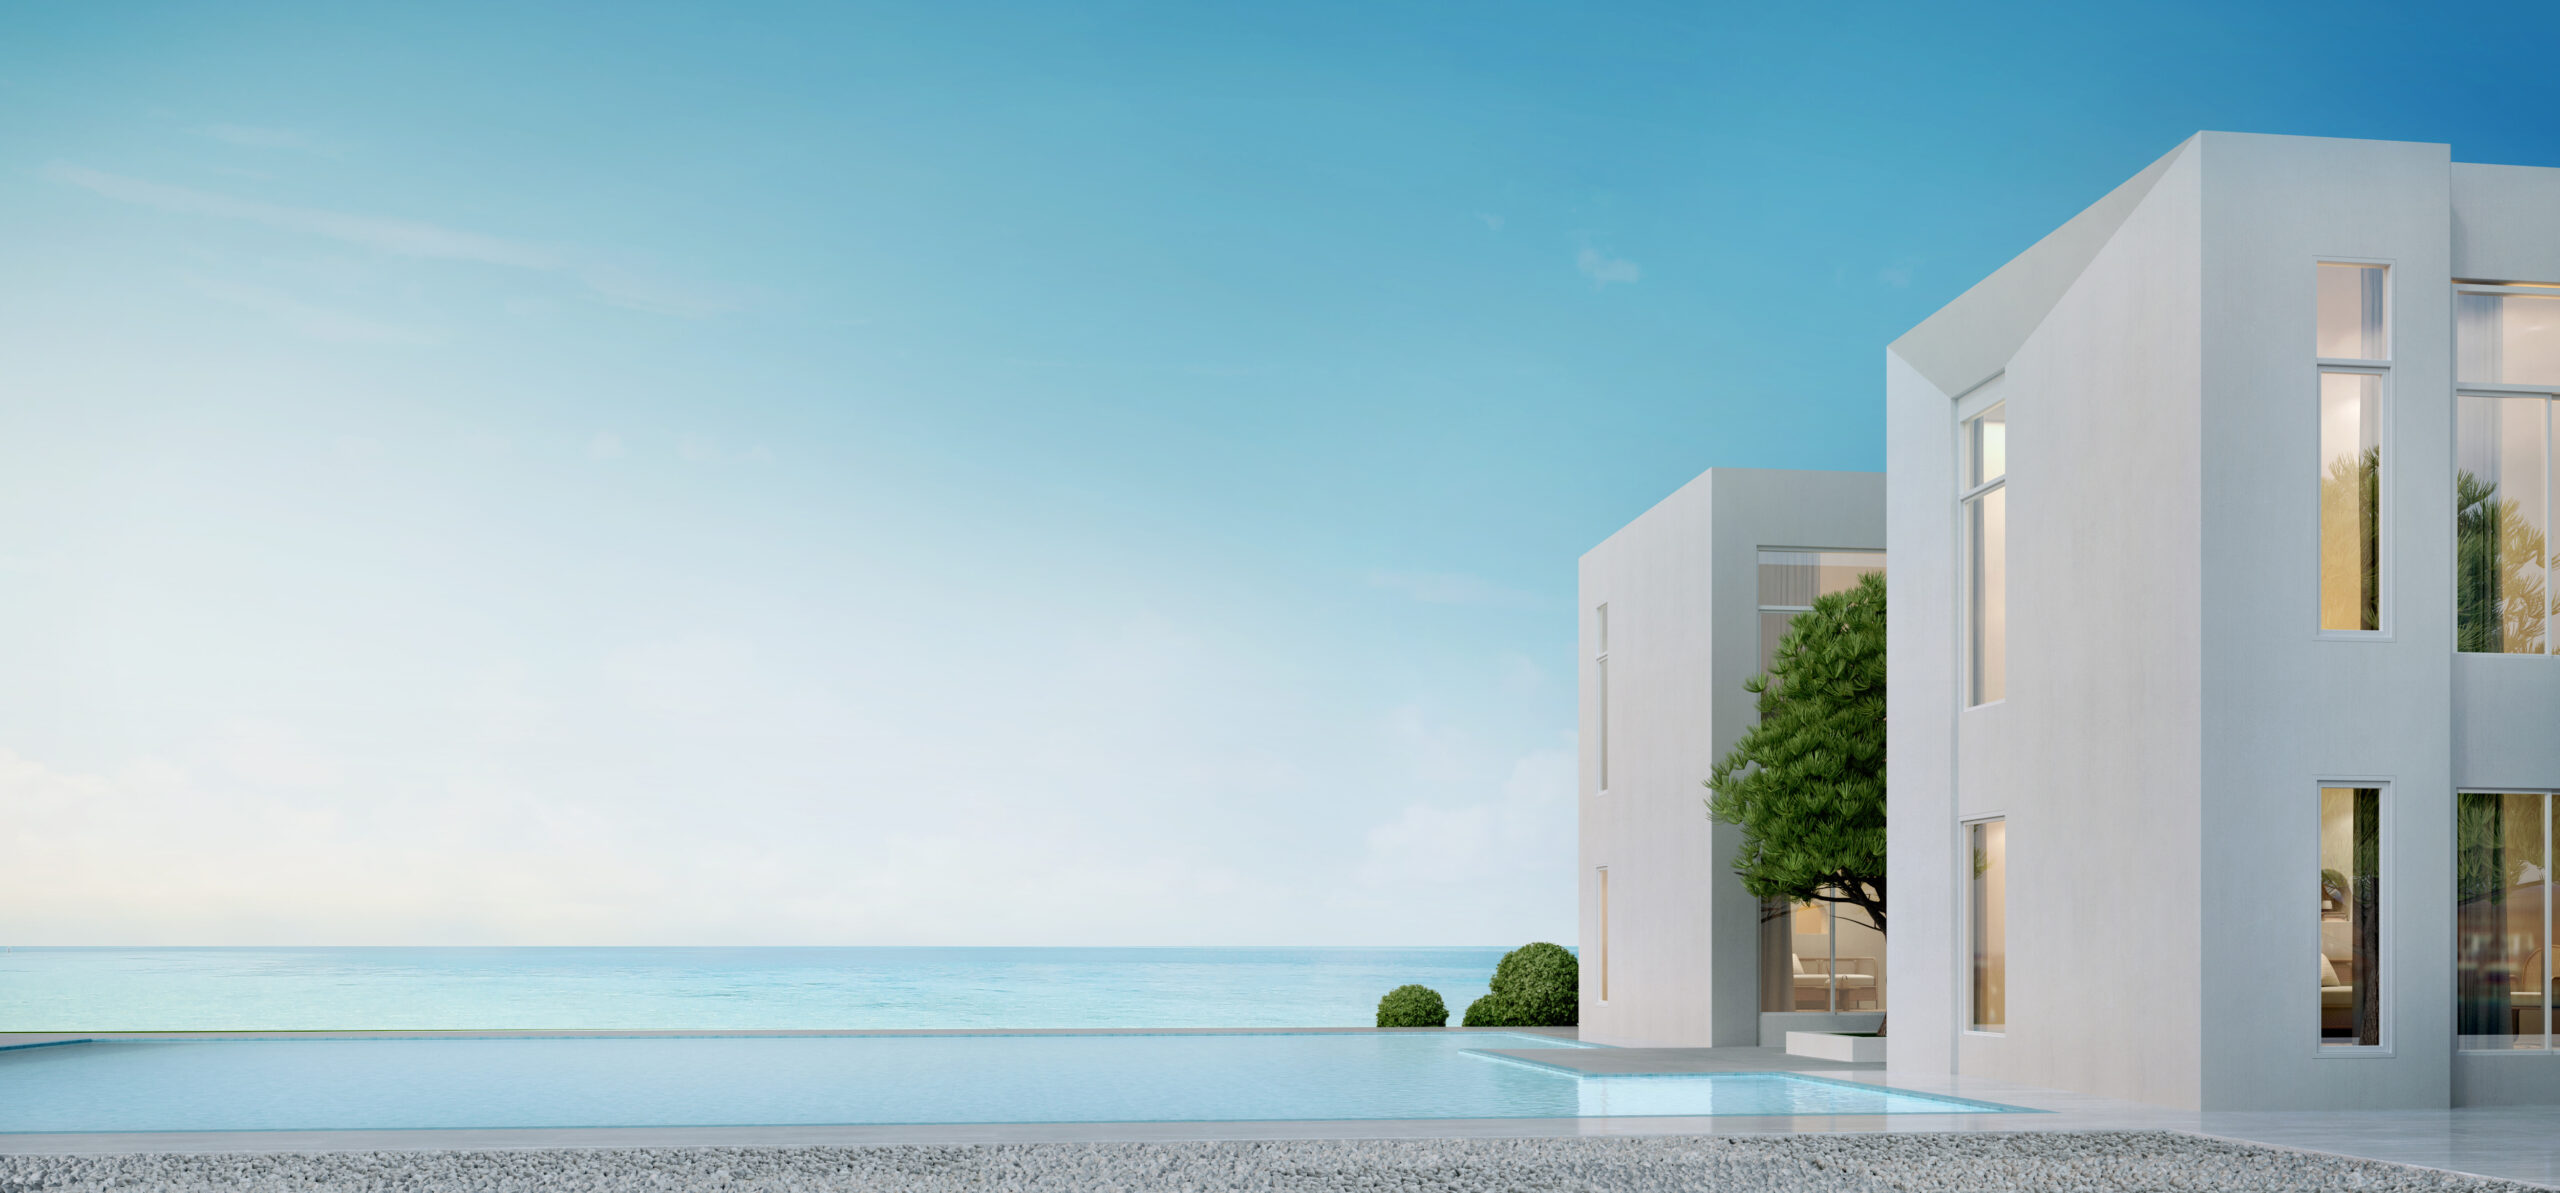 Sea view.Modern architecture with swimming pool and blue sky.Concept for vacation home or hotel.3d rendering